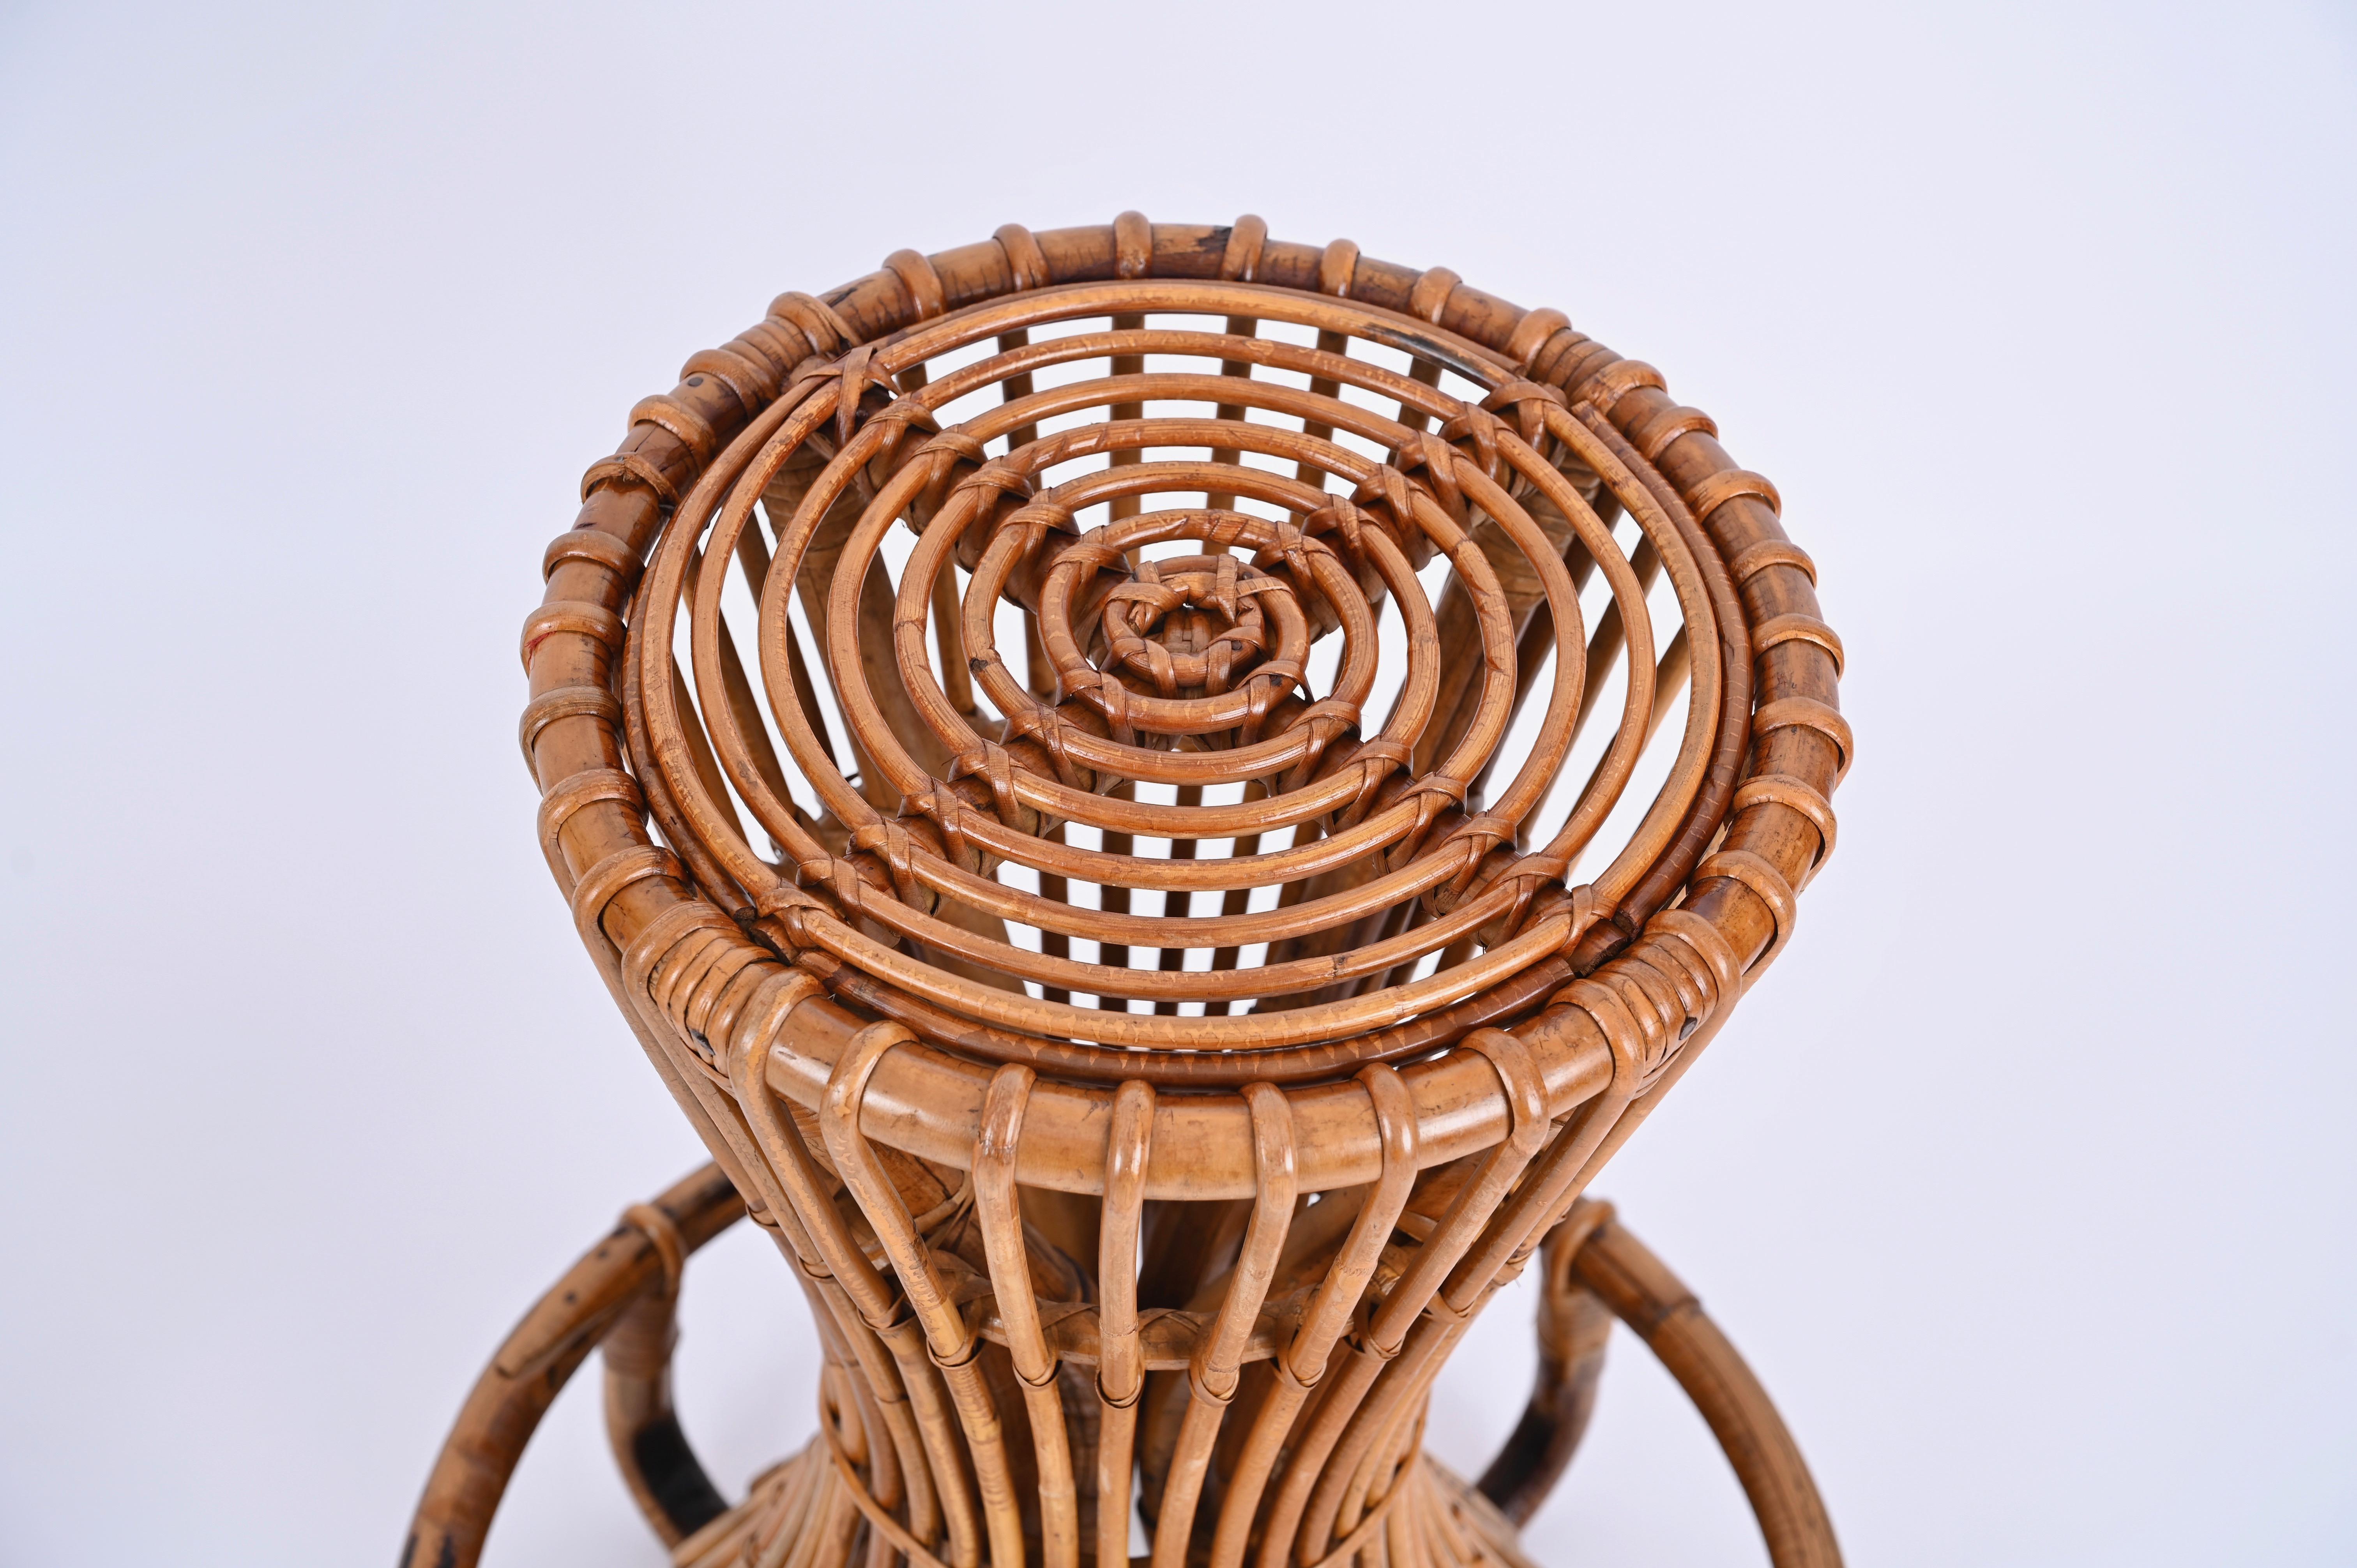 Magnificent pair of Mid-Century bar stools in curved rattan and wicker. These stunning stools were designed by Tito Agnoli for Bonacina in Italy in the 1950s.
 
The stools feature a gorgeous hourglass-shaped structure, fully made in curved rattan